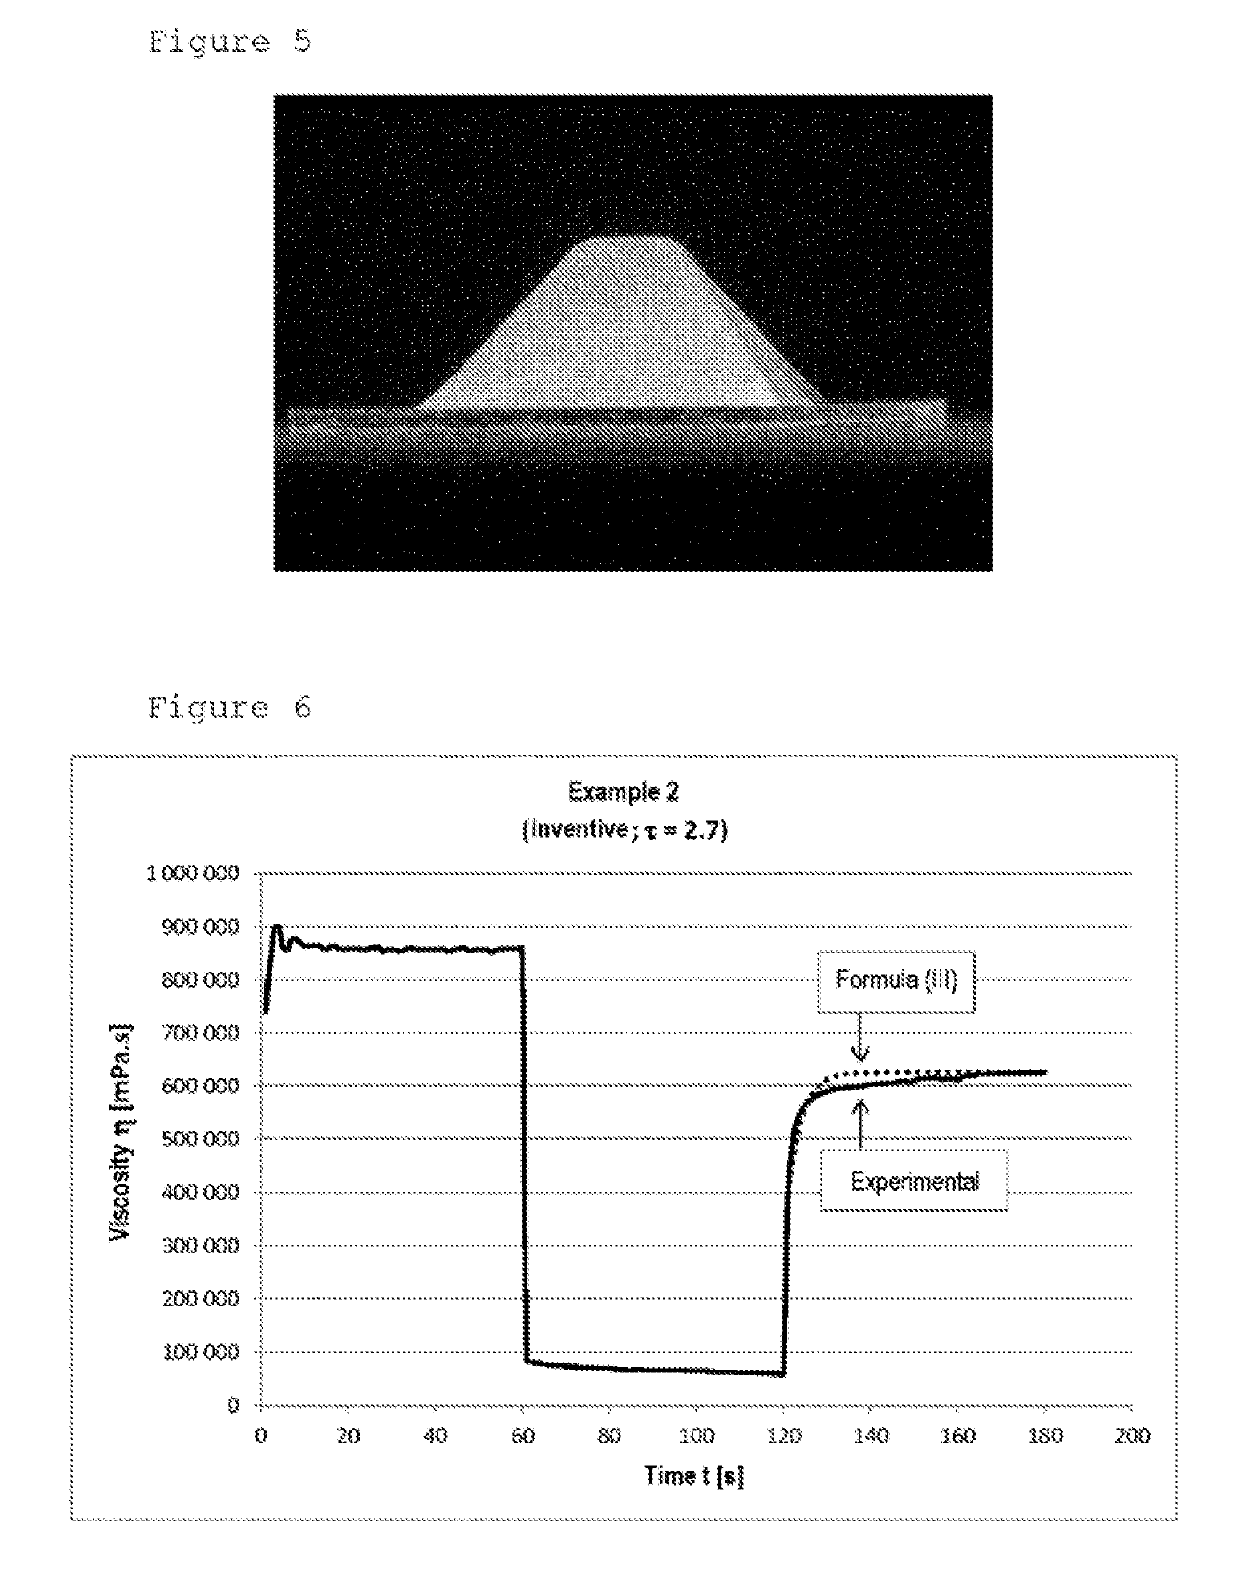 Silicone compositions for producing elastomeric molded parts by means of ballistic methods